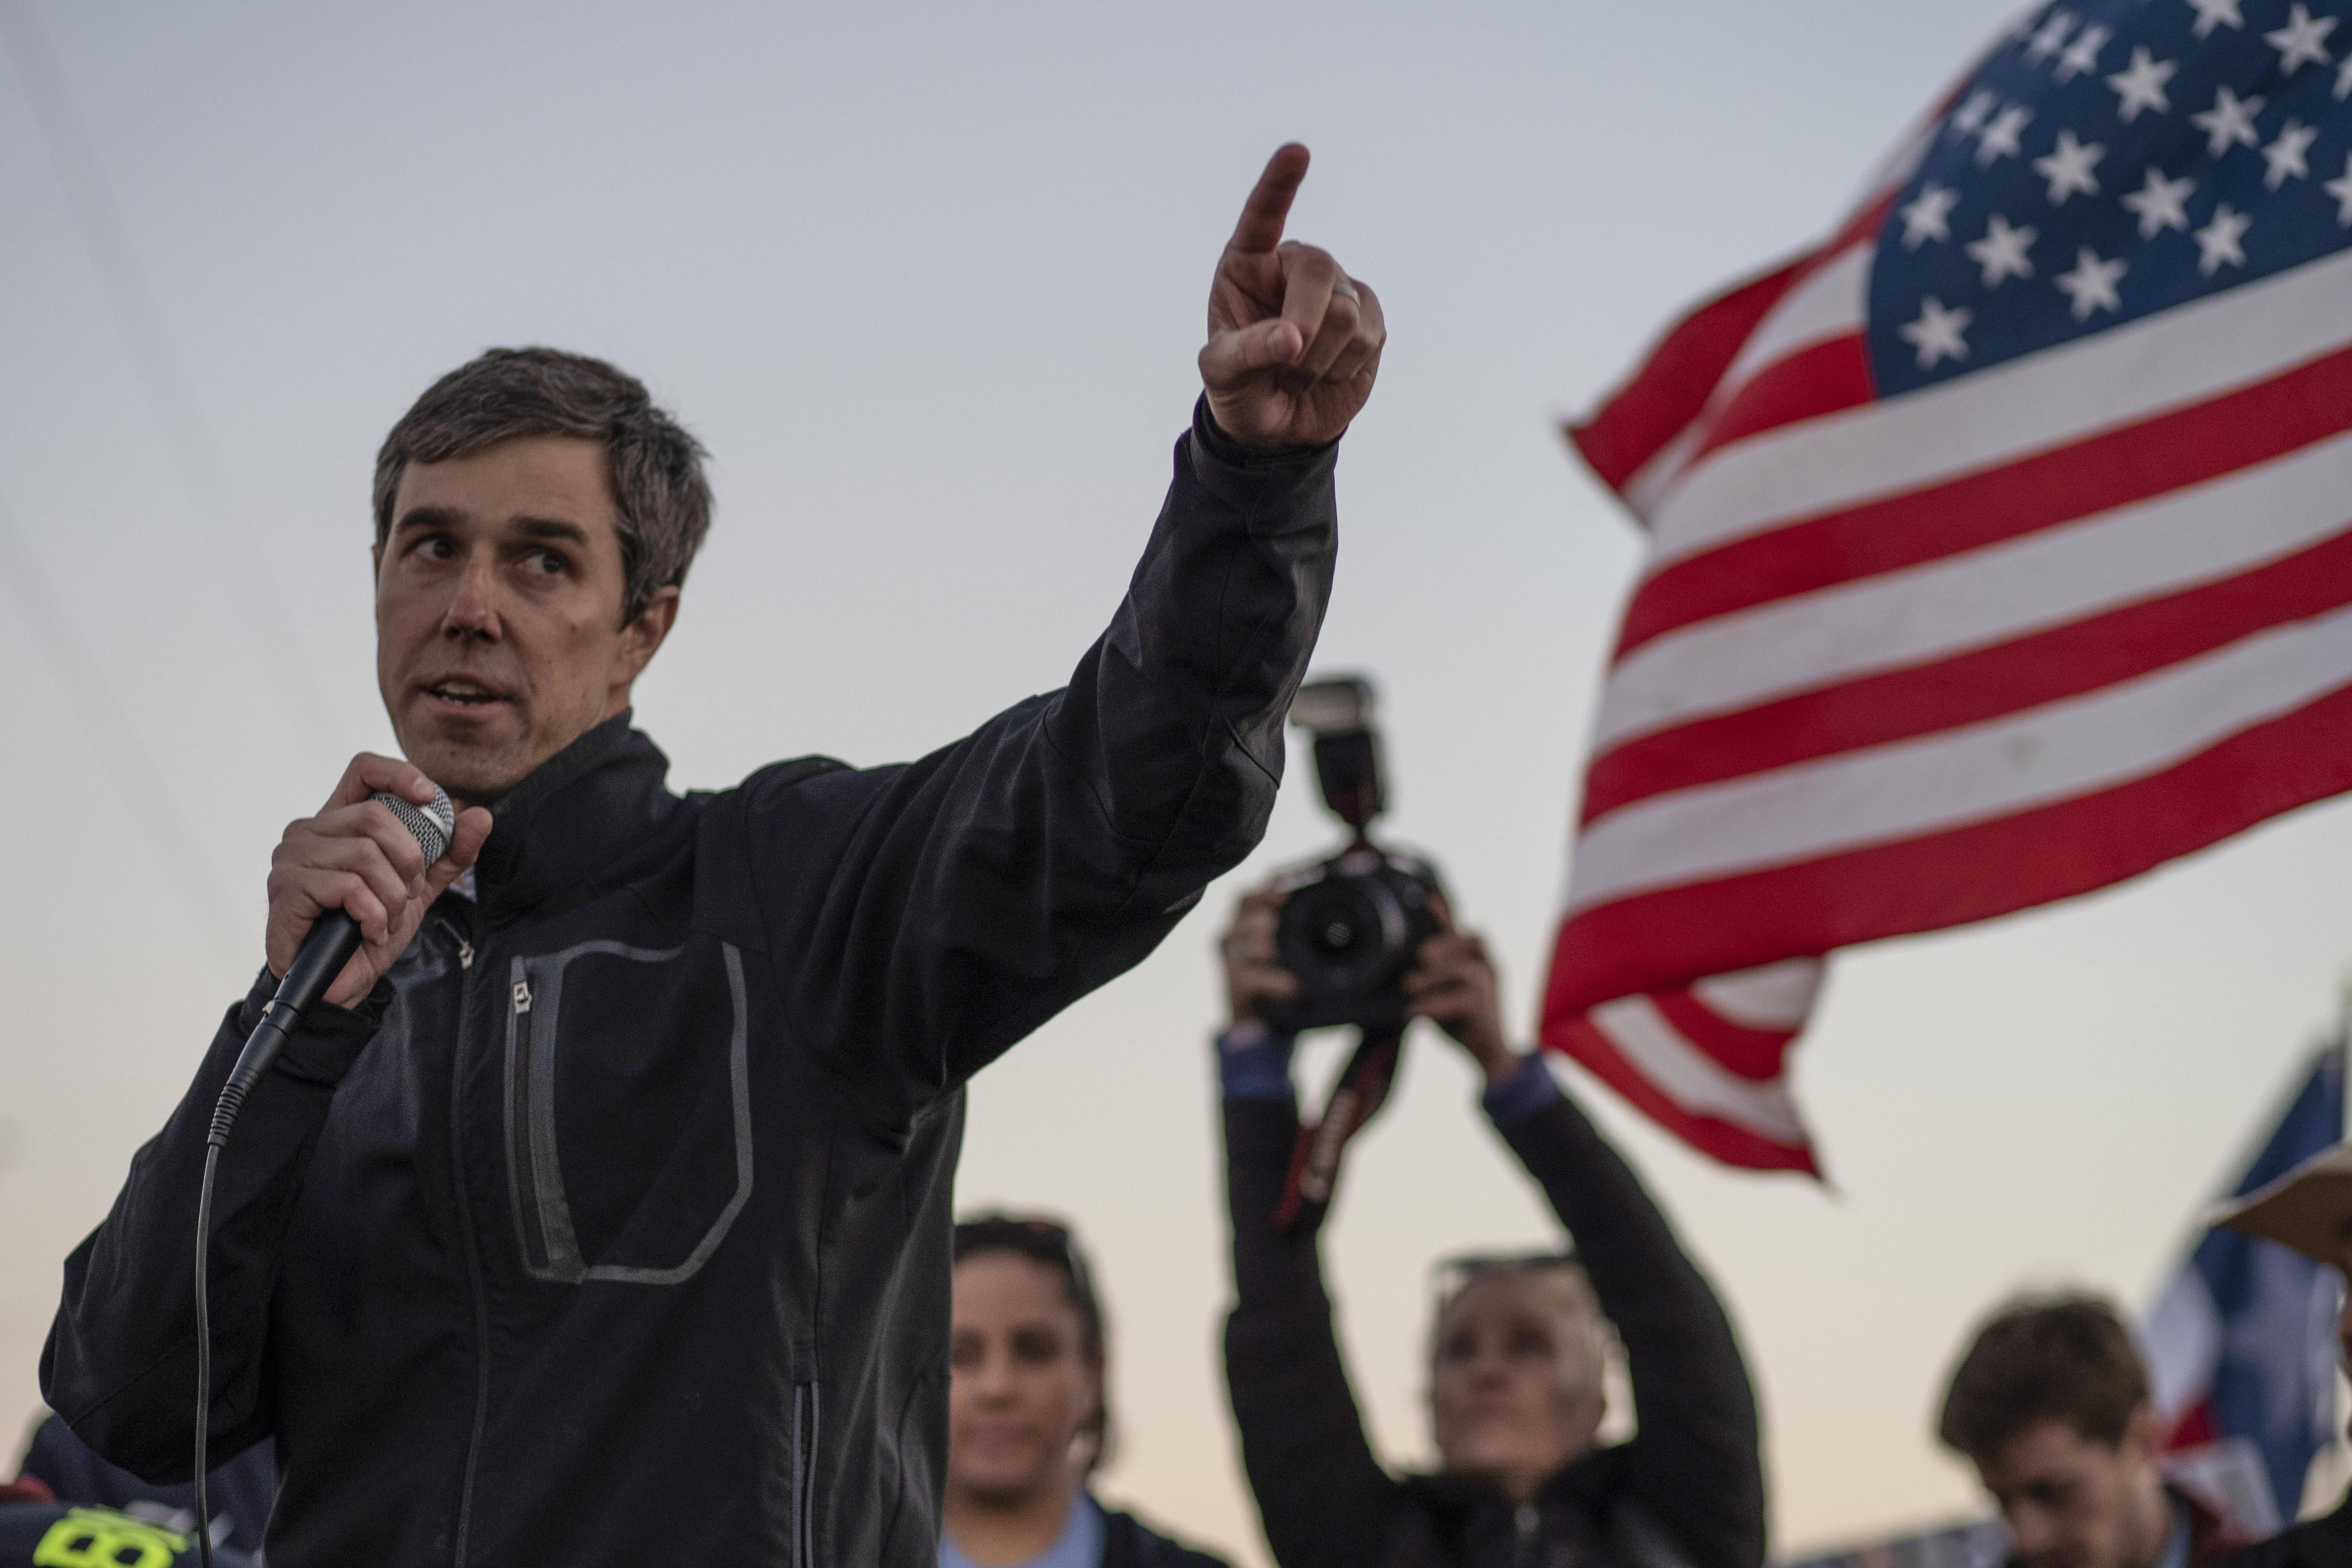 Beto O'Rourke speaks to a crowd of marchers during the anti-Trump 'March for Truth' in El Paso, Texas, on Feb. 11, 2019. 